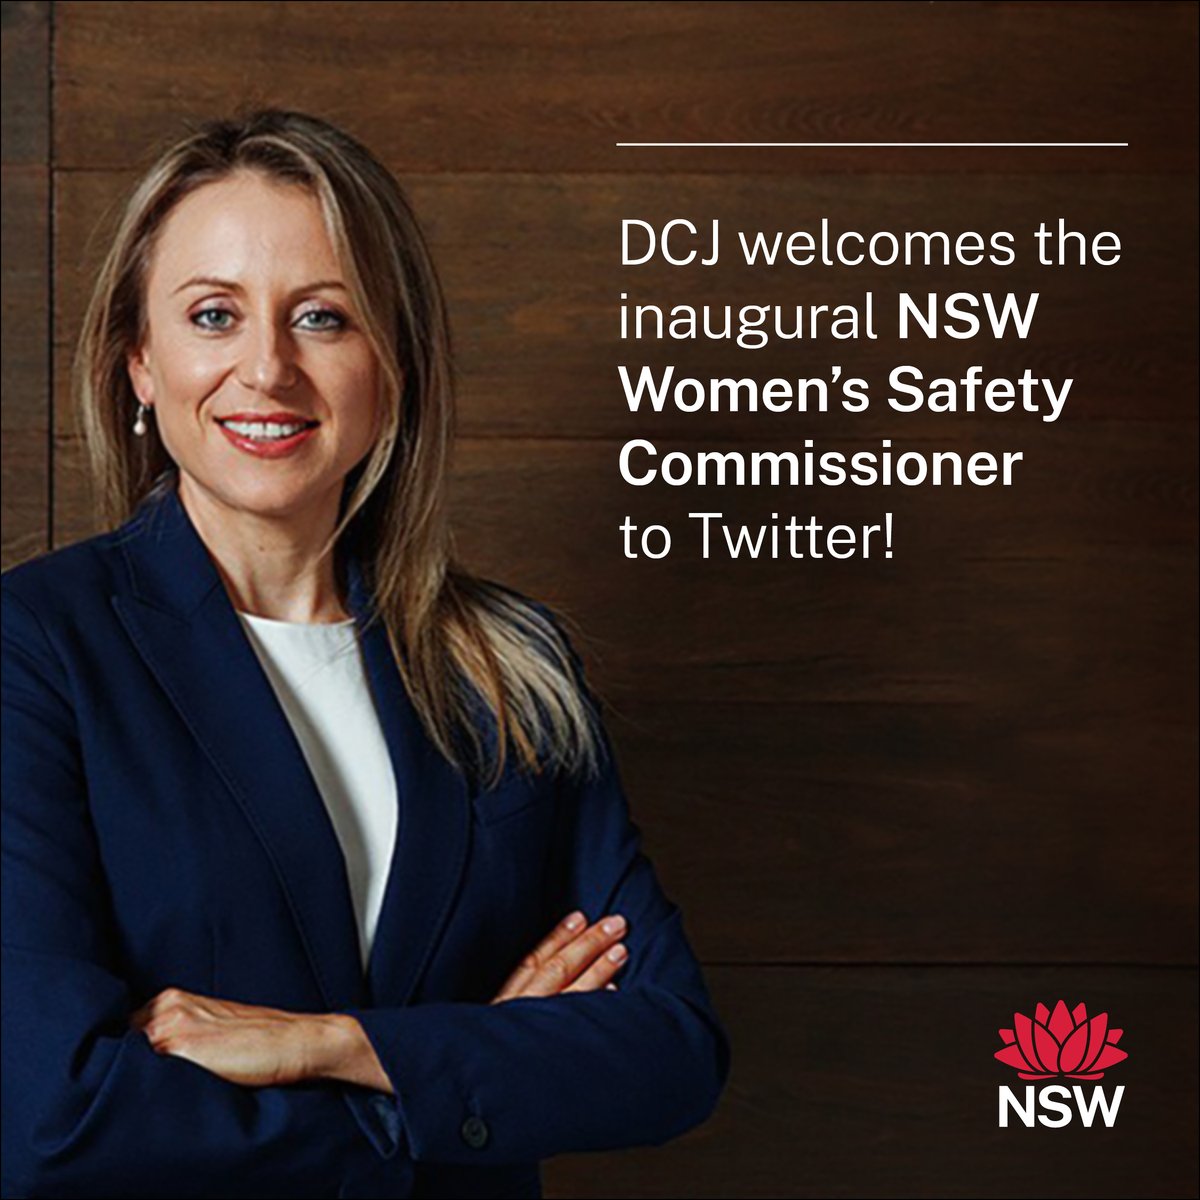 .@HannahTonkinWSC is now on Twitter in her role as the first NSW Women’s Safety Commissioner. Follow her account to learn more about Dr Tonkin’s work, leadership, oversight and advice on NSW women’s safety policy development and law reform.